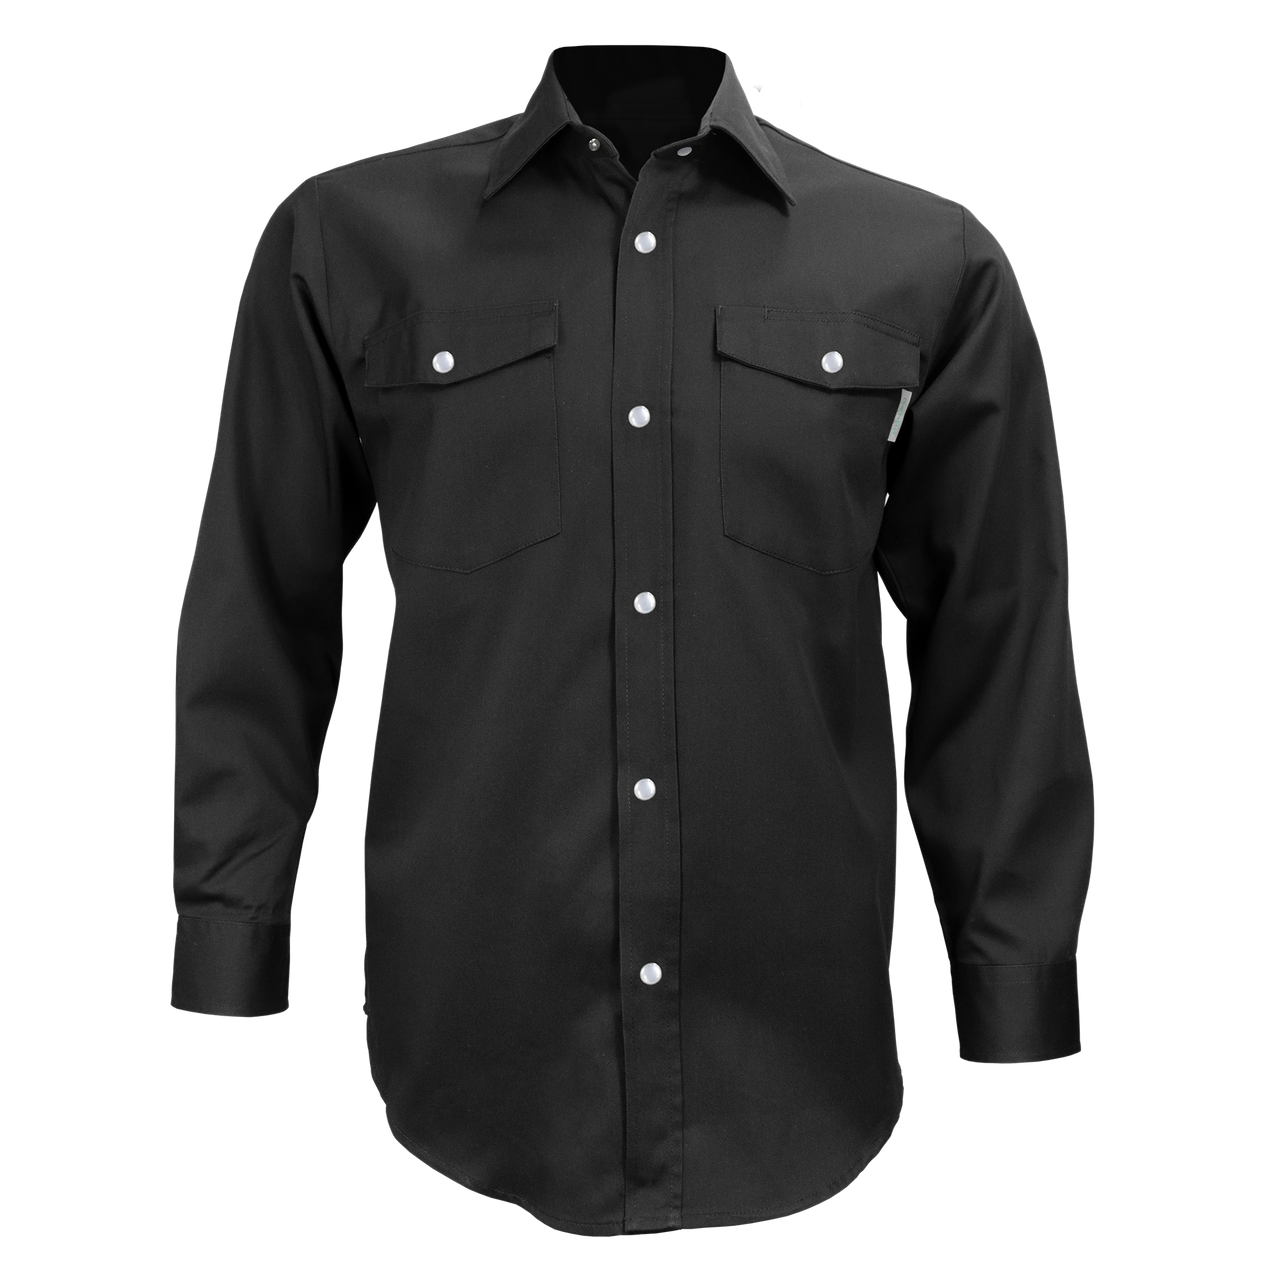 625S - Chemise à manches longues (boutons pressions)||625S - Long sleeve shirt (snaps)